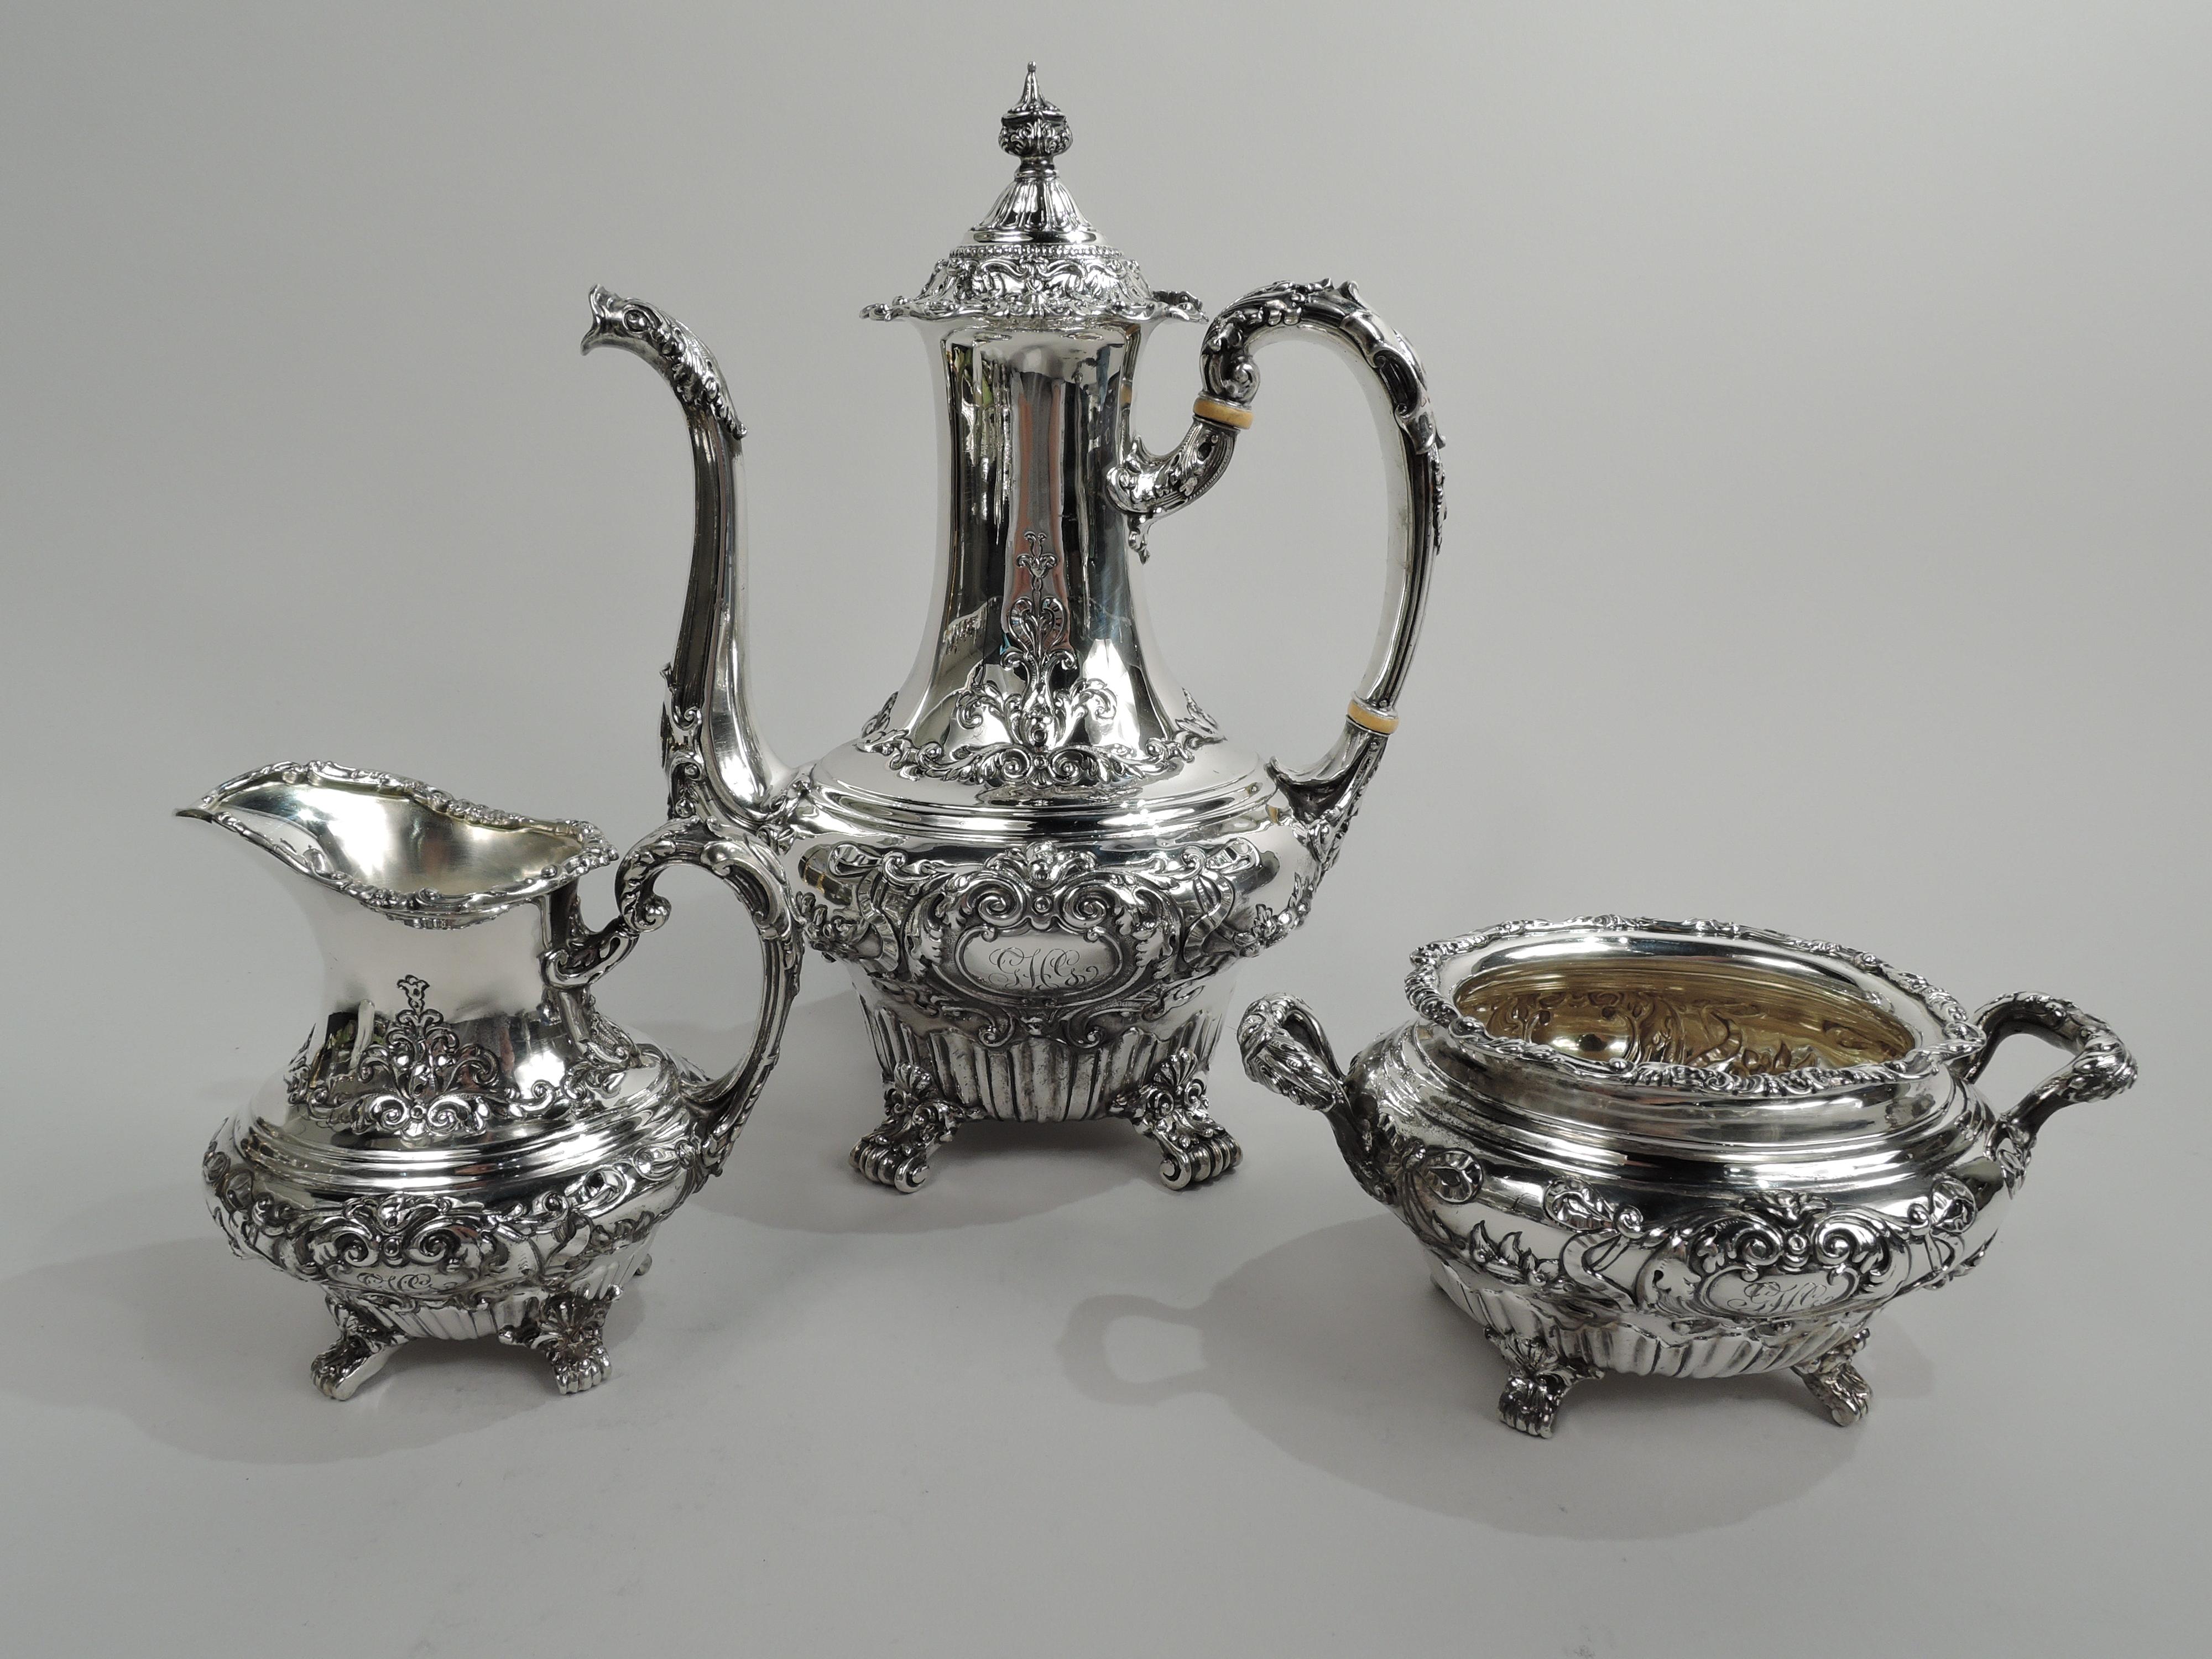 Turn-of-the-century Victorian Rococo sterling silver 3-piece coffee set. Made by Gorham in Providence. This set comprises coffeepot, creamer, and sugar. Bellied with irregular fluting at bottom and leaf and scroll-mounted volute scroll supports